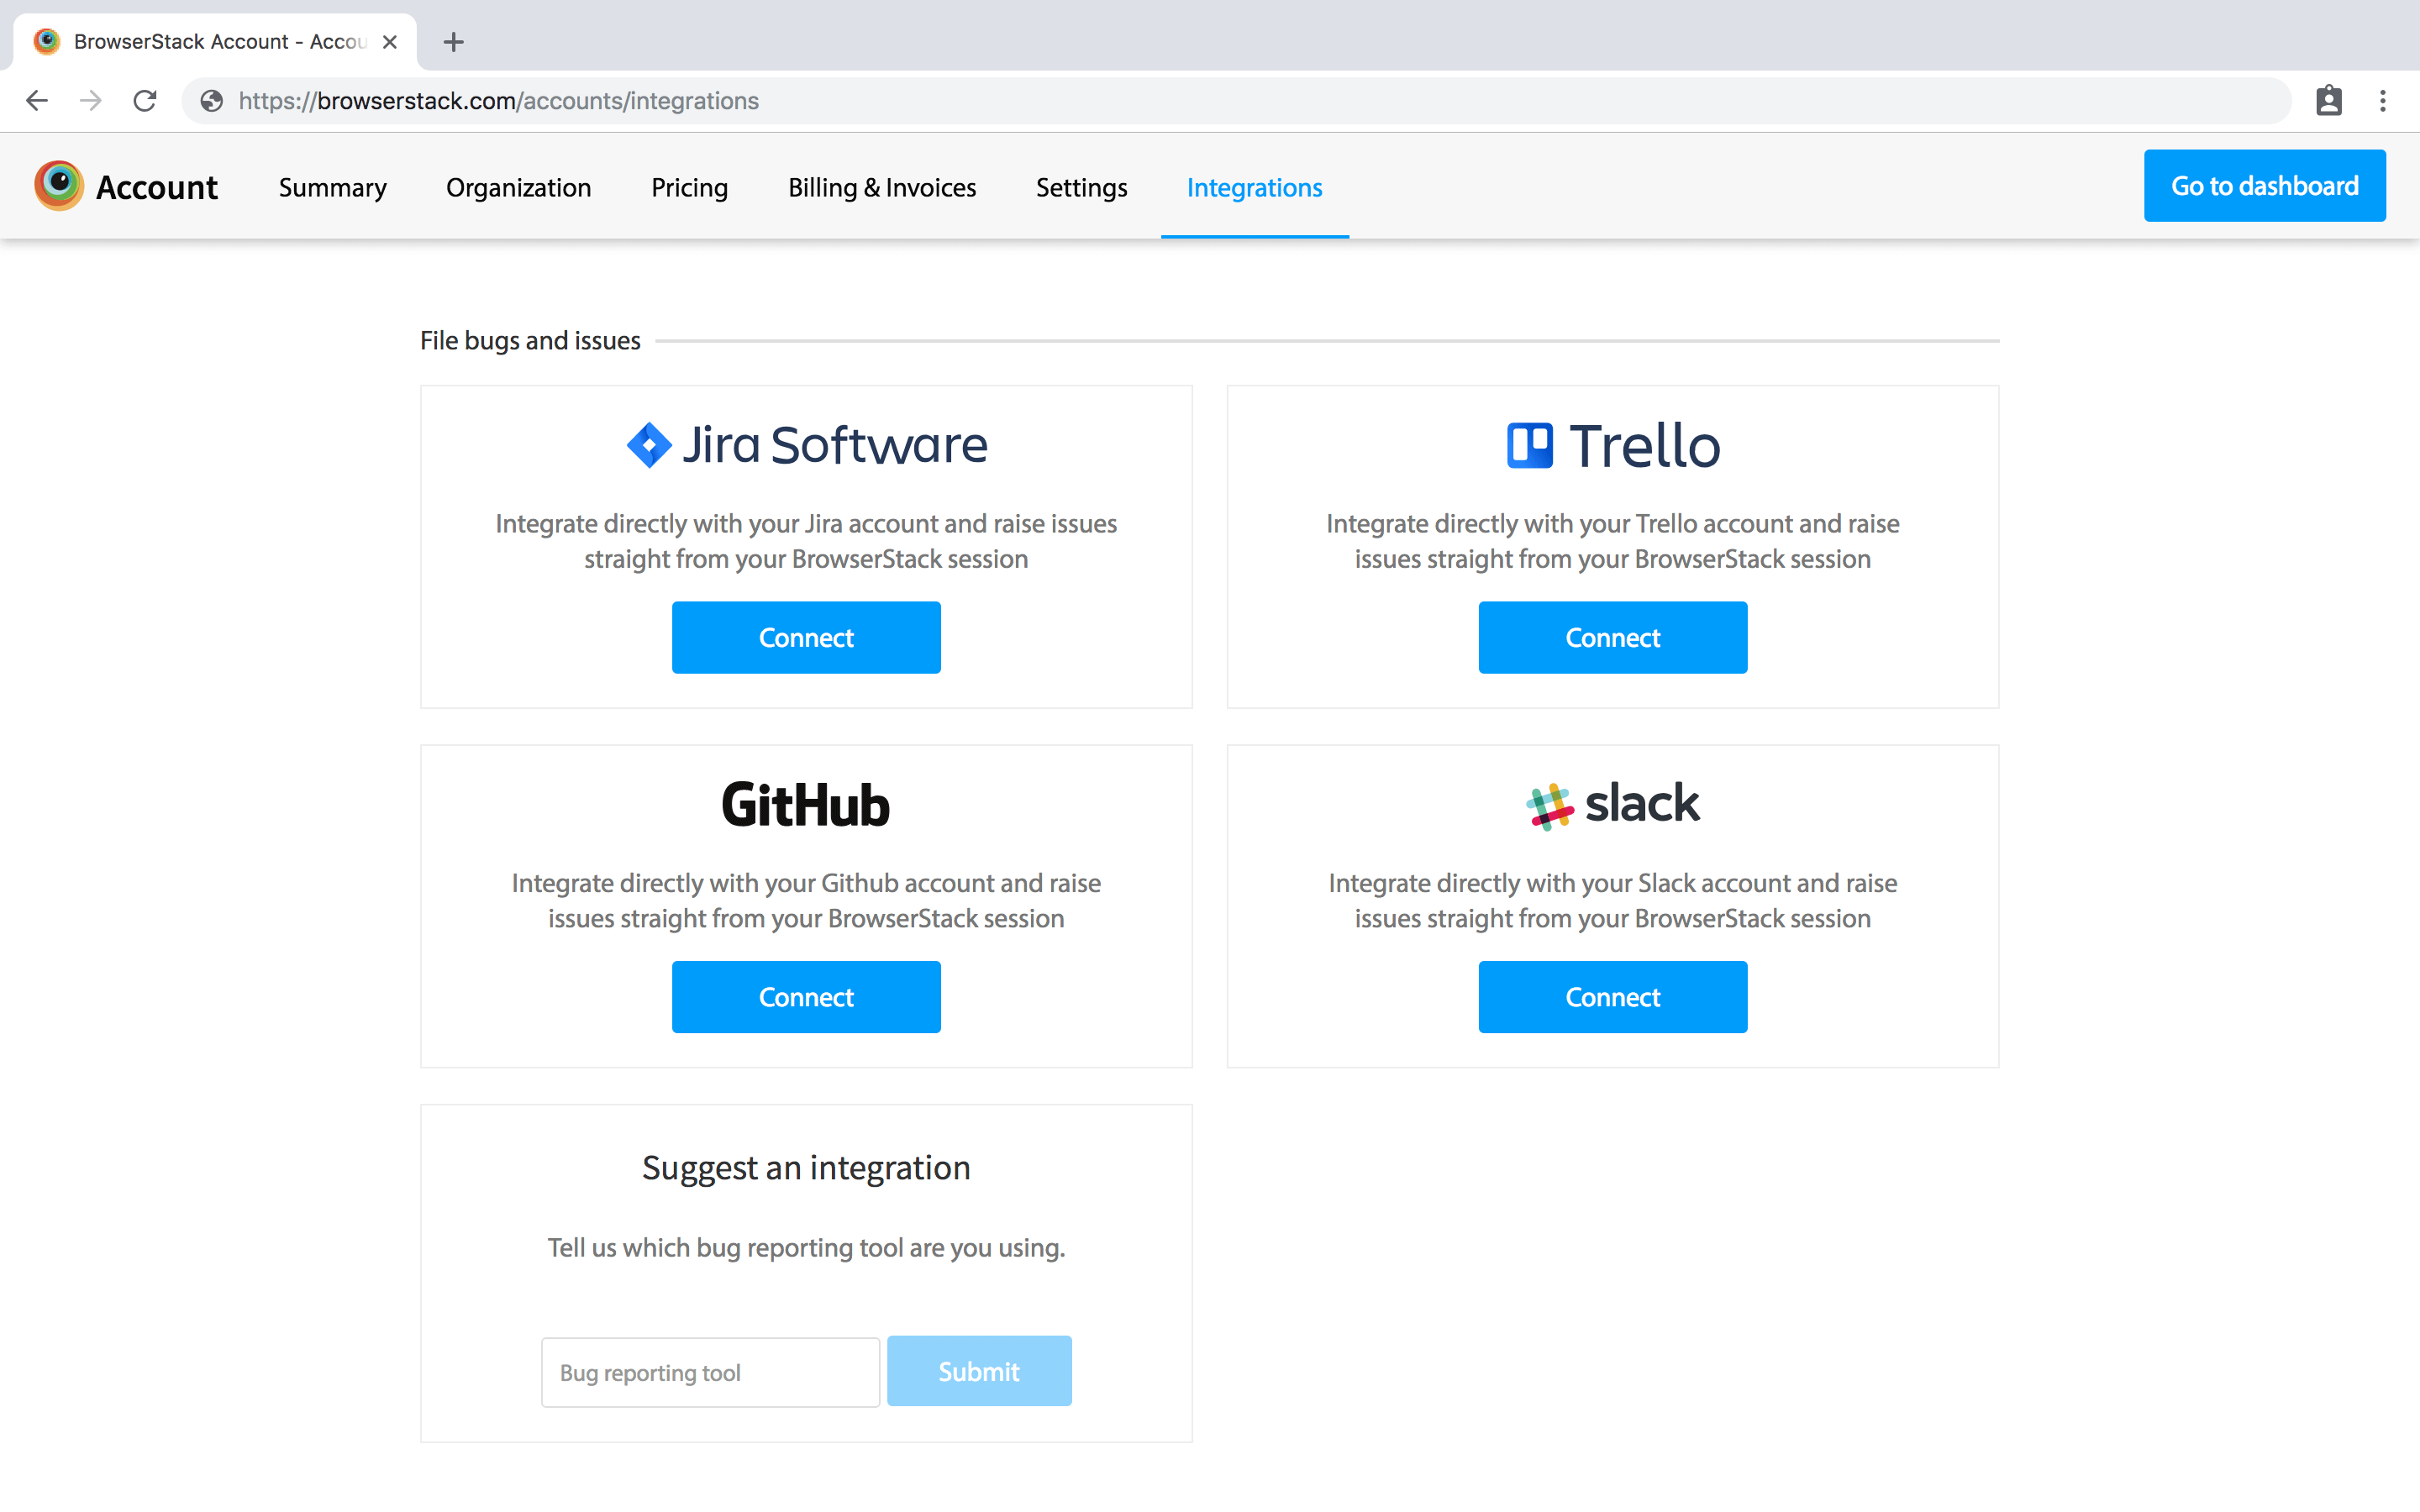 List of available integrations